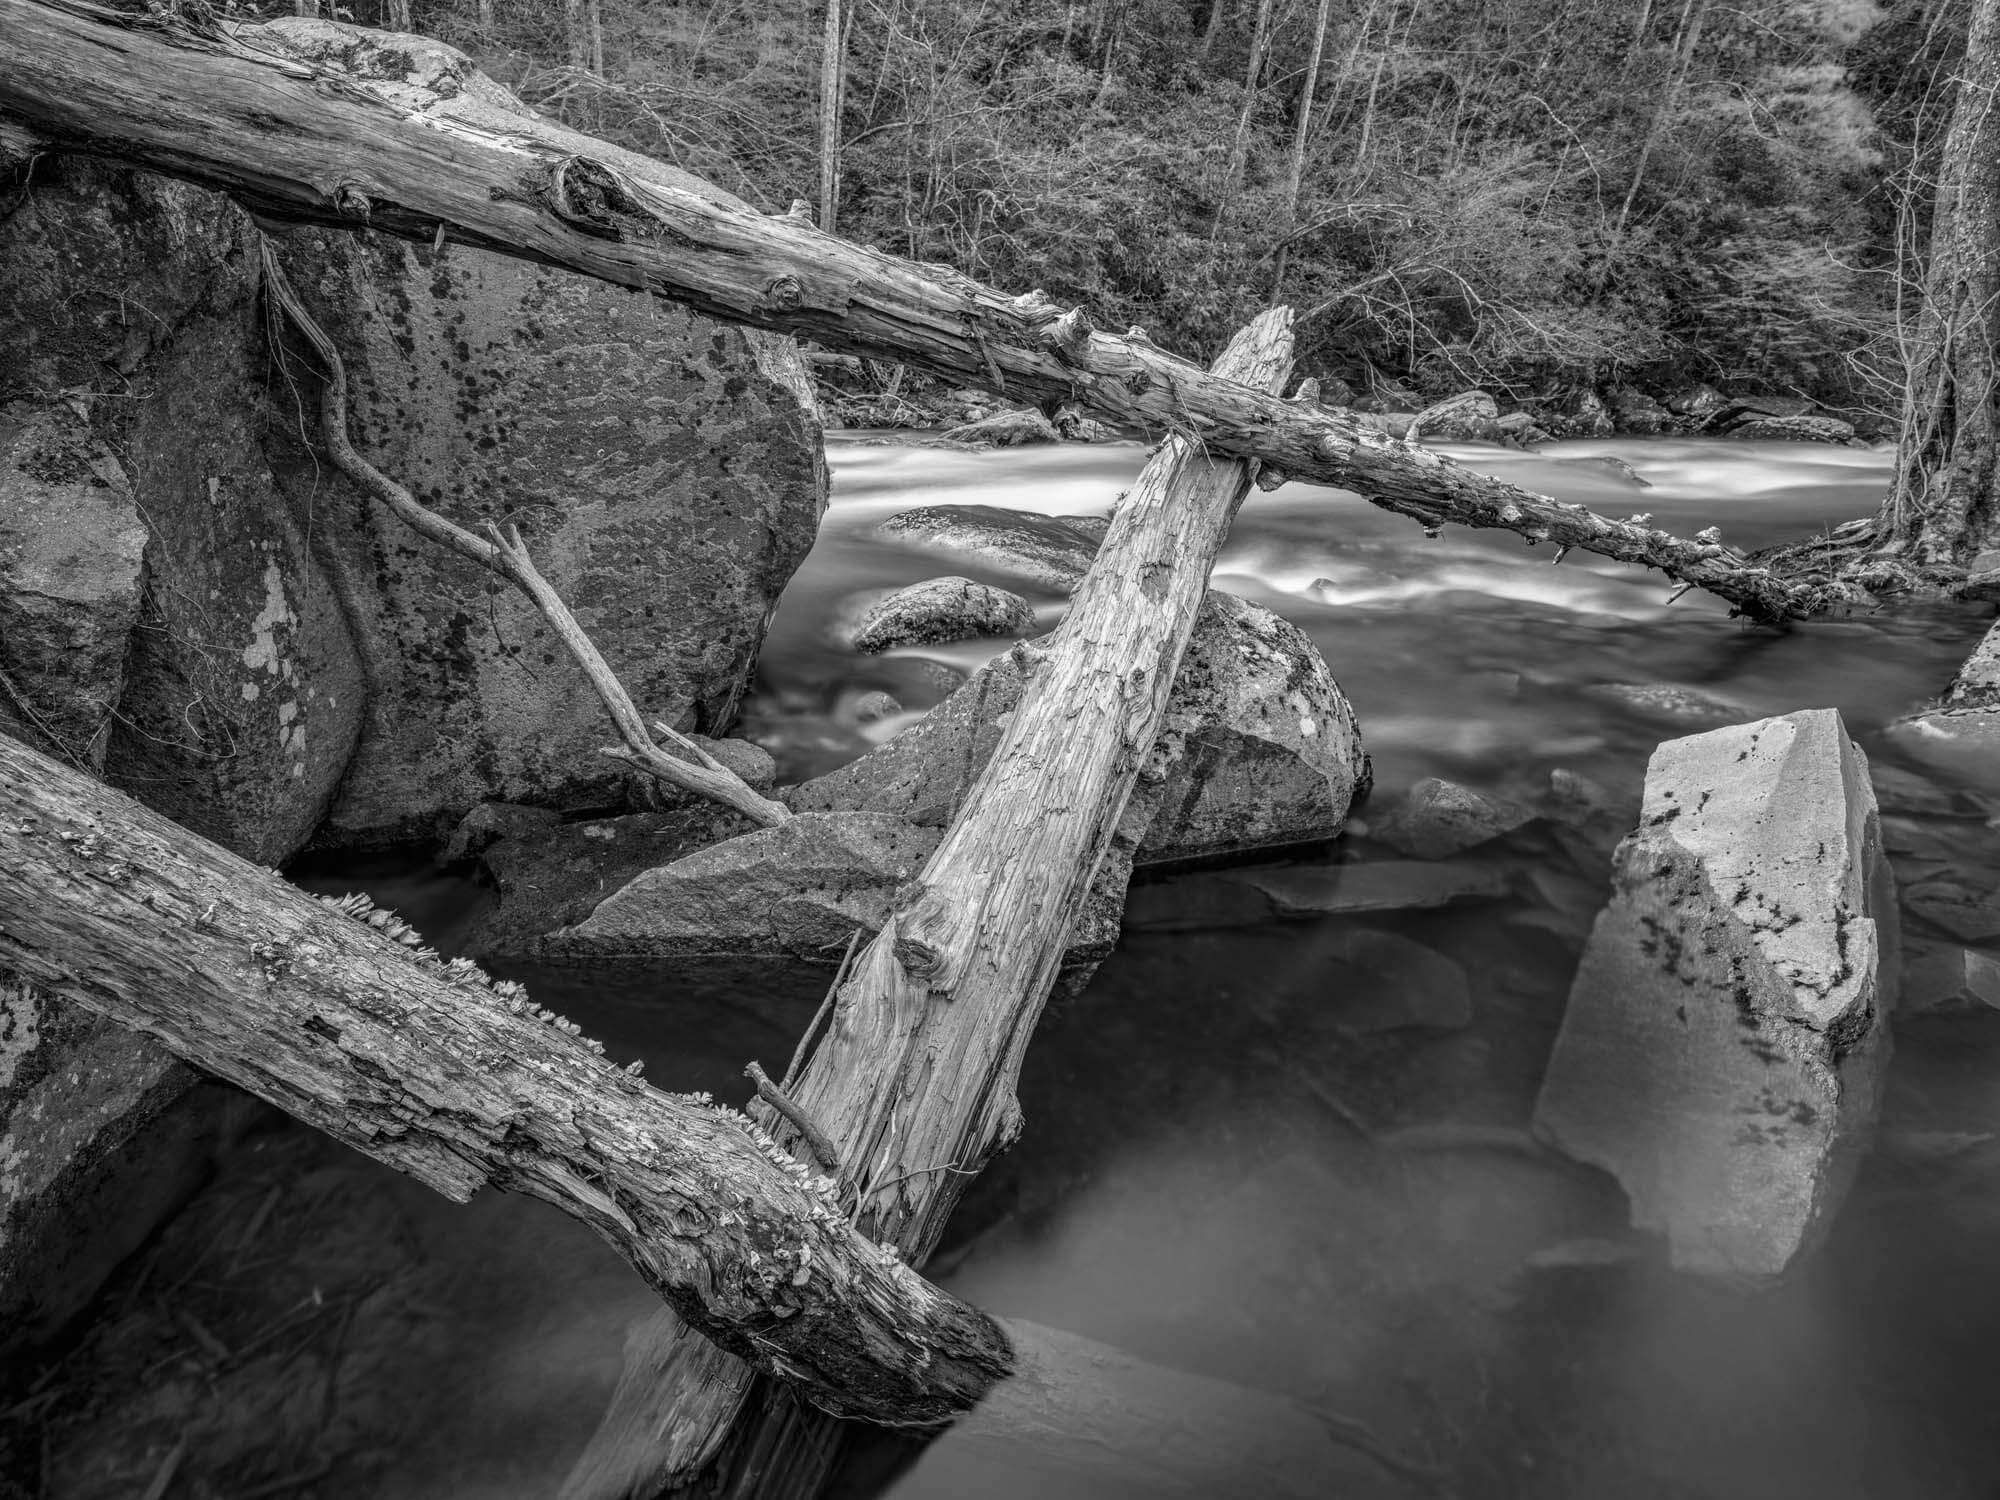 Triangle trees Little River (Great Smoky Mountains) - By Tillman Crane